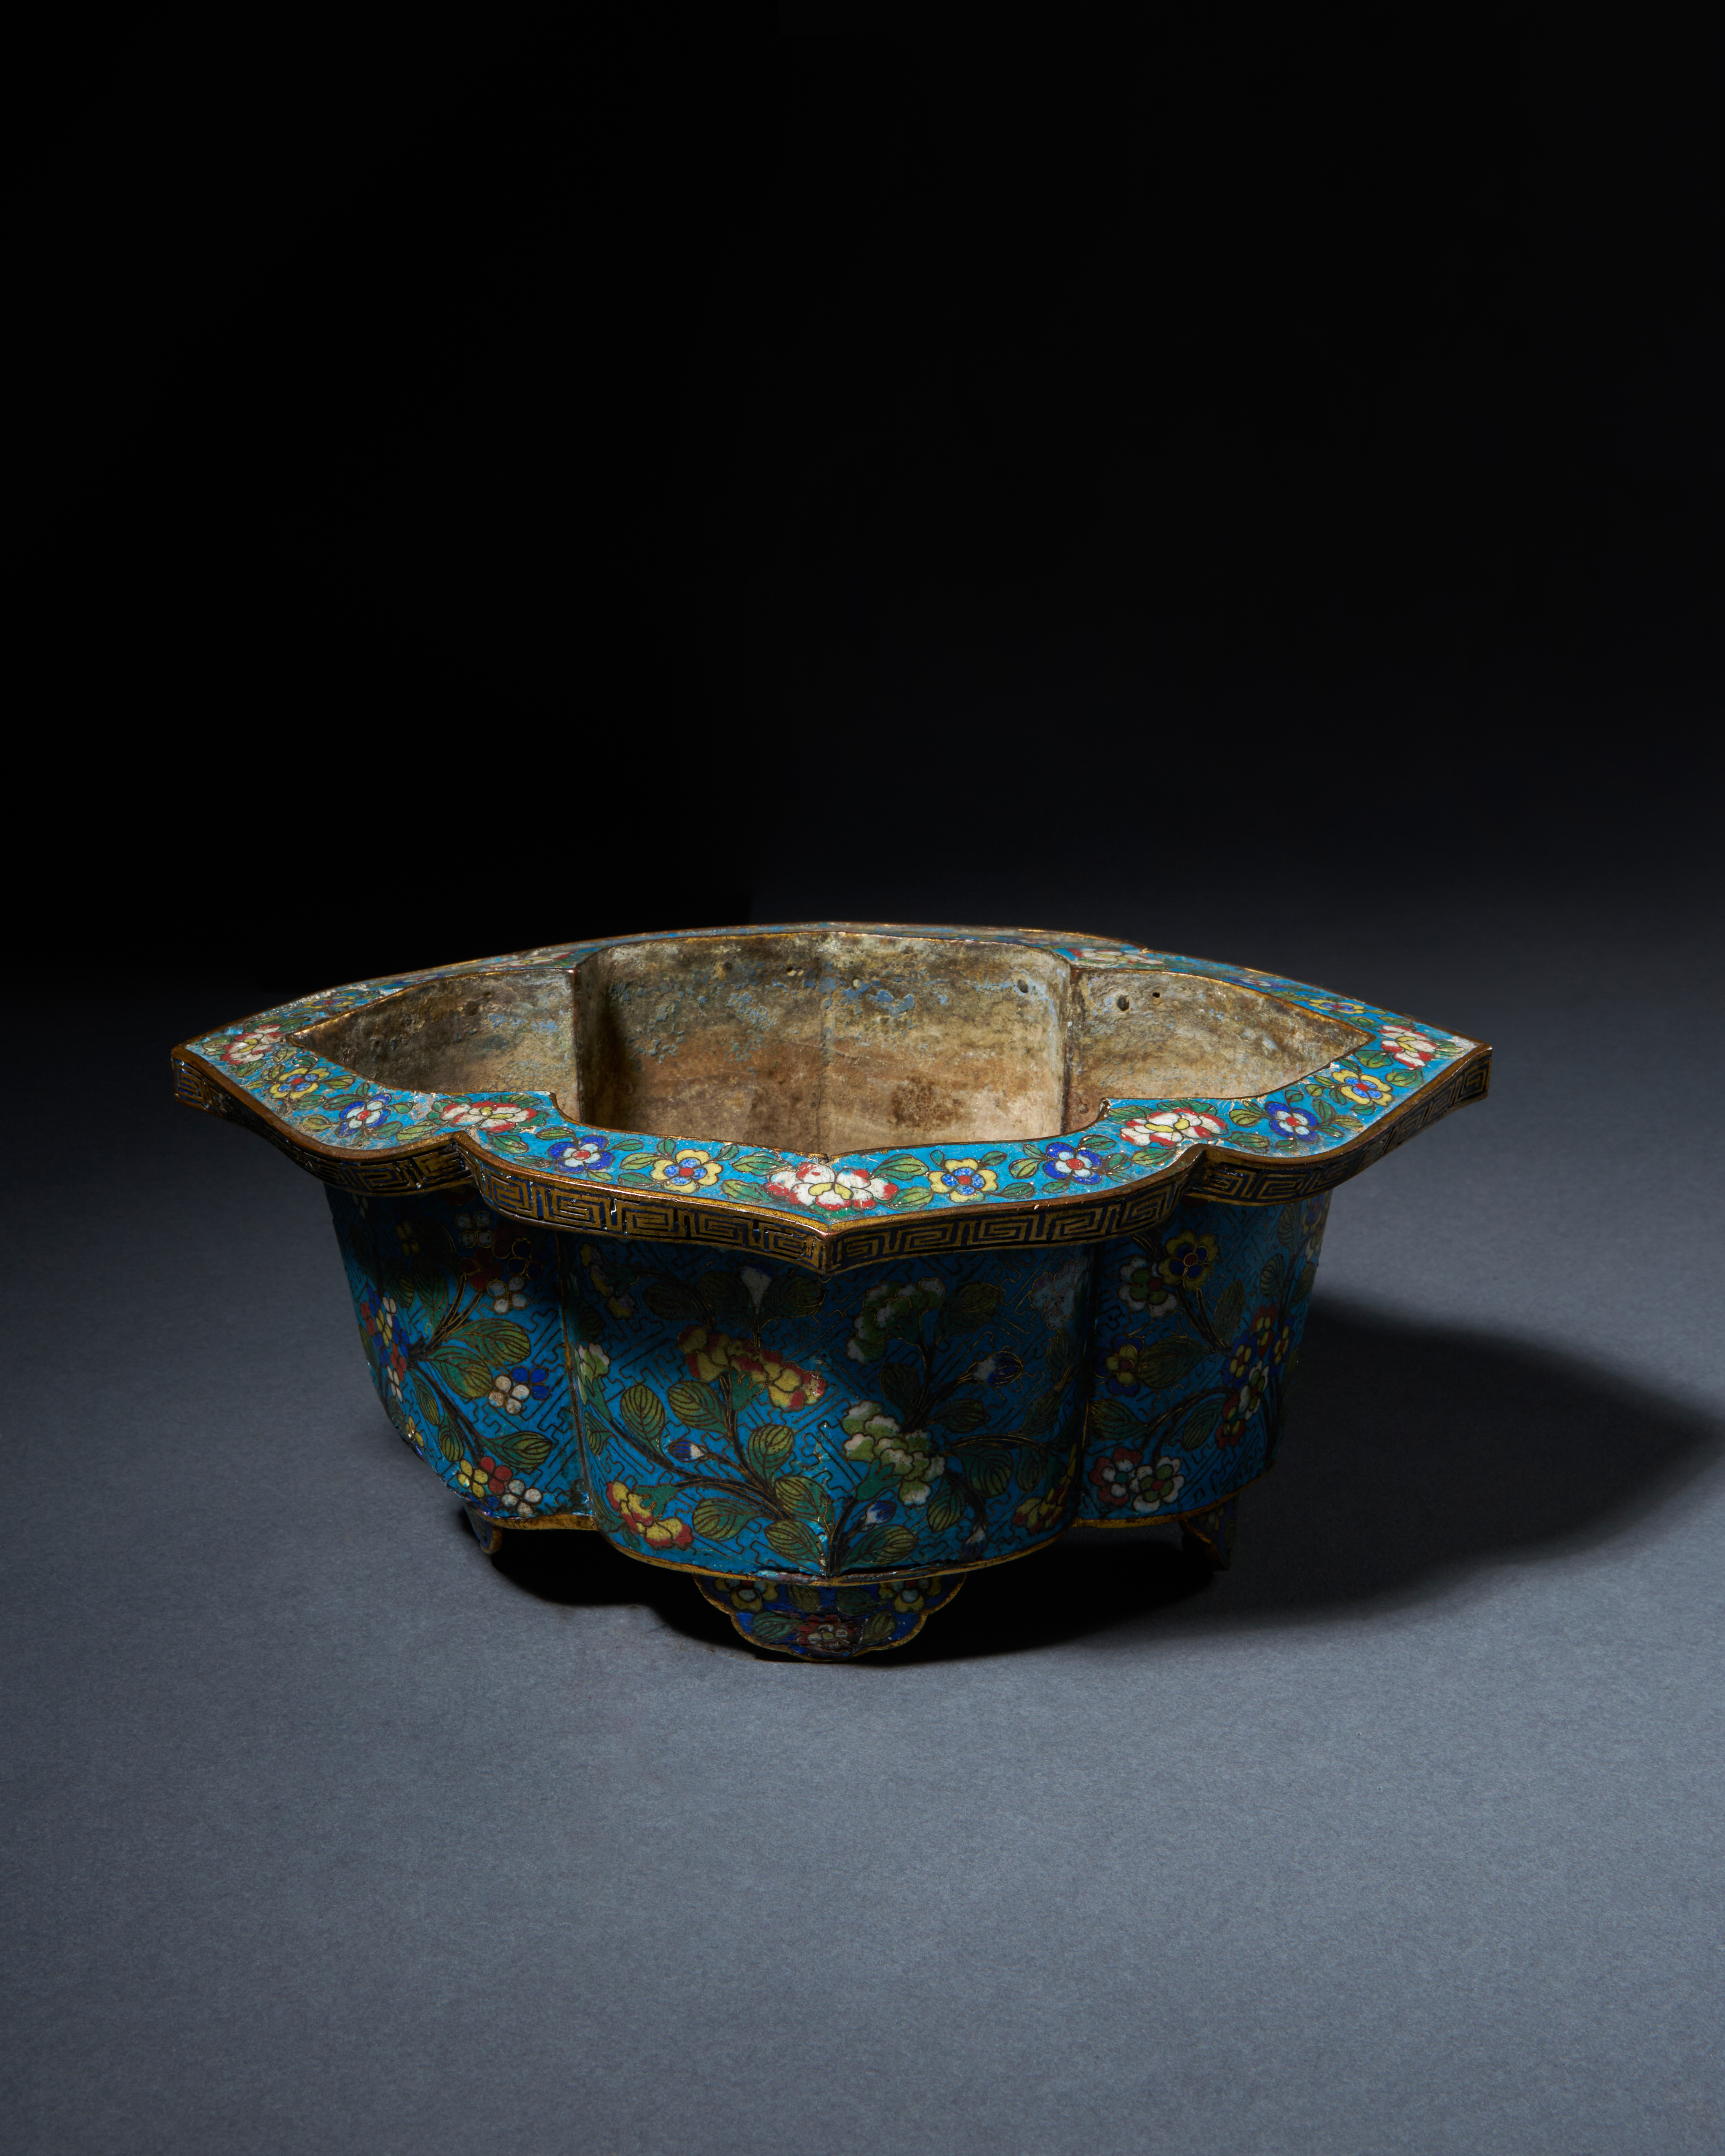 A CLOISONNE POT, QING DYNASTY (1644-1911) - Image 2 of 5